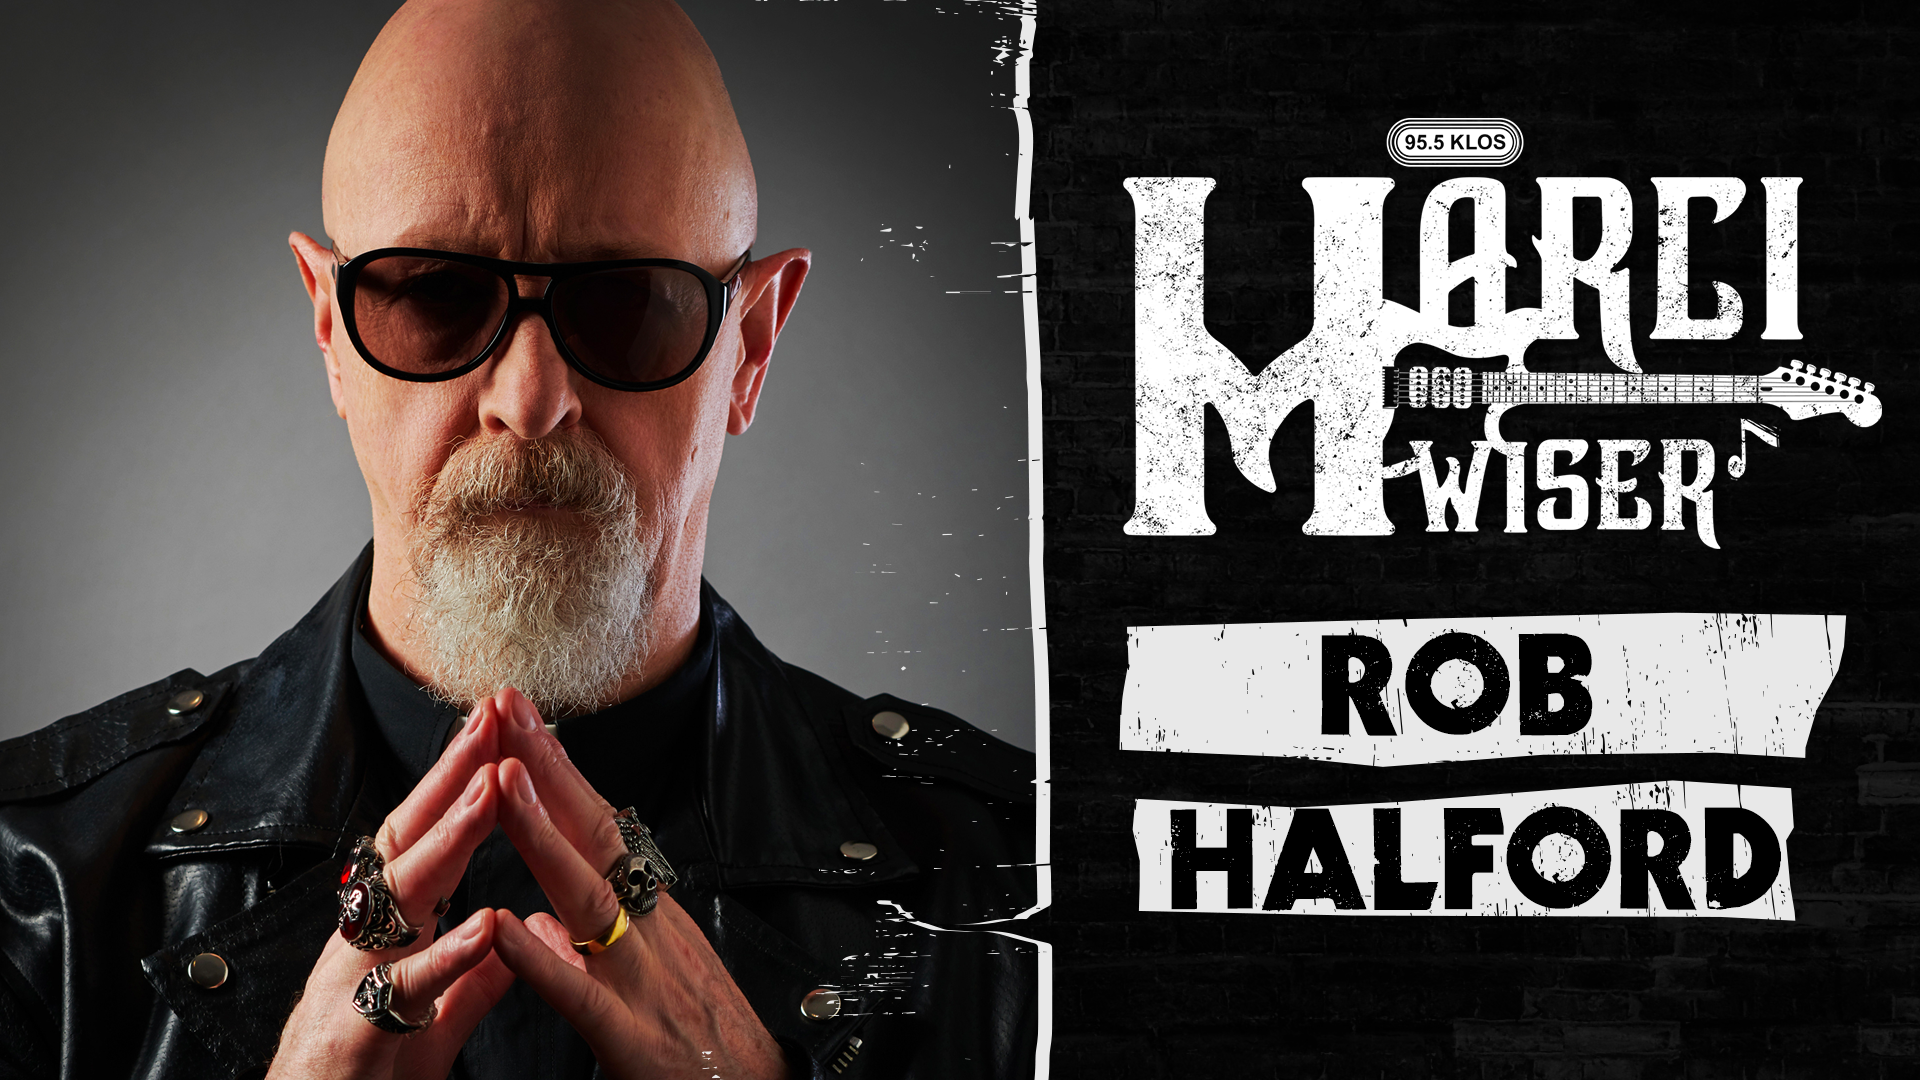 Rob Halford Checks In With Marci Wiser